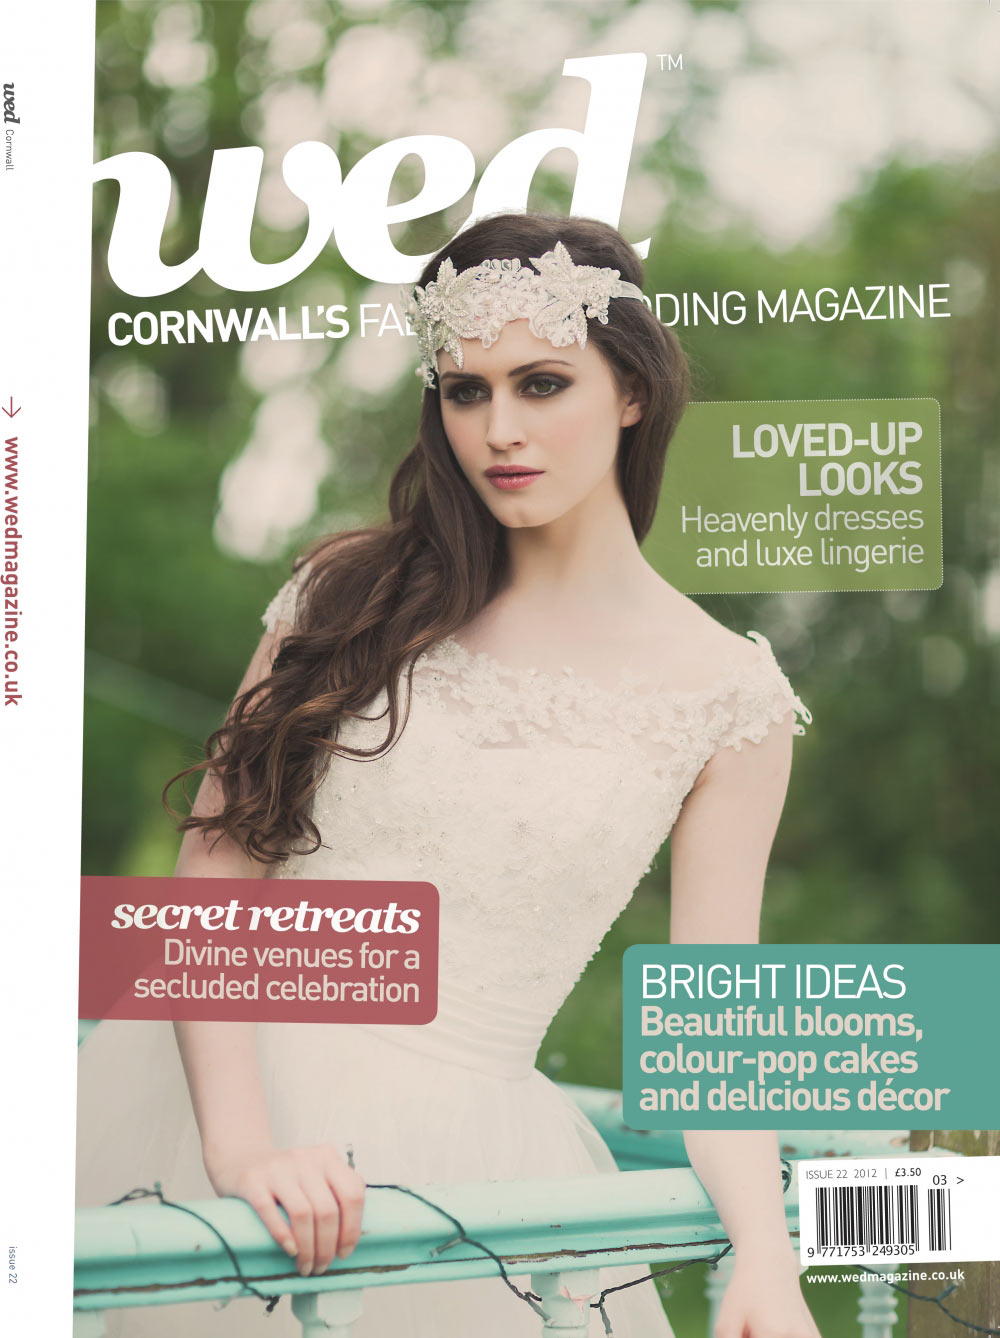 New Cornwall Issue Out Now!